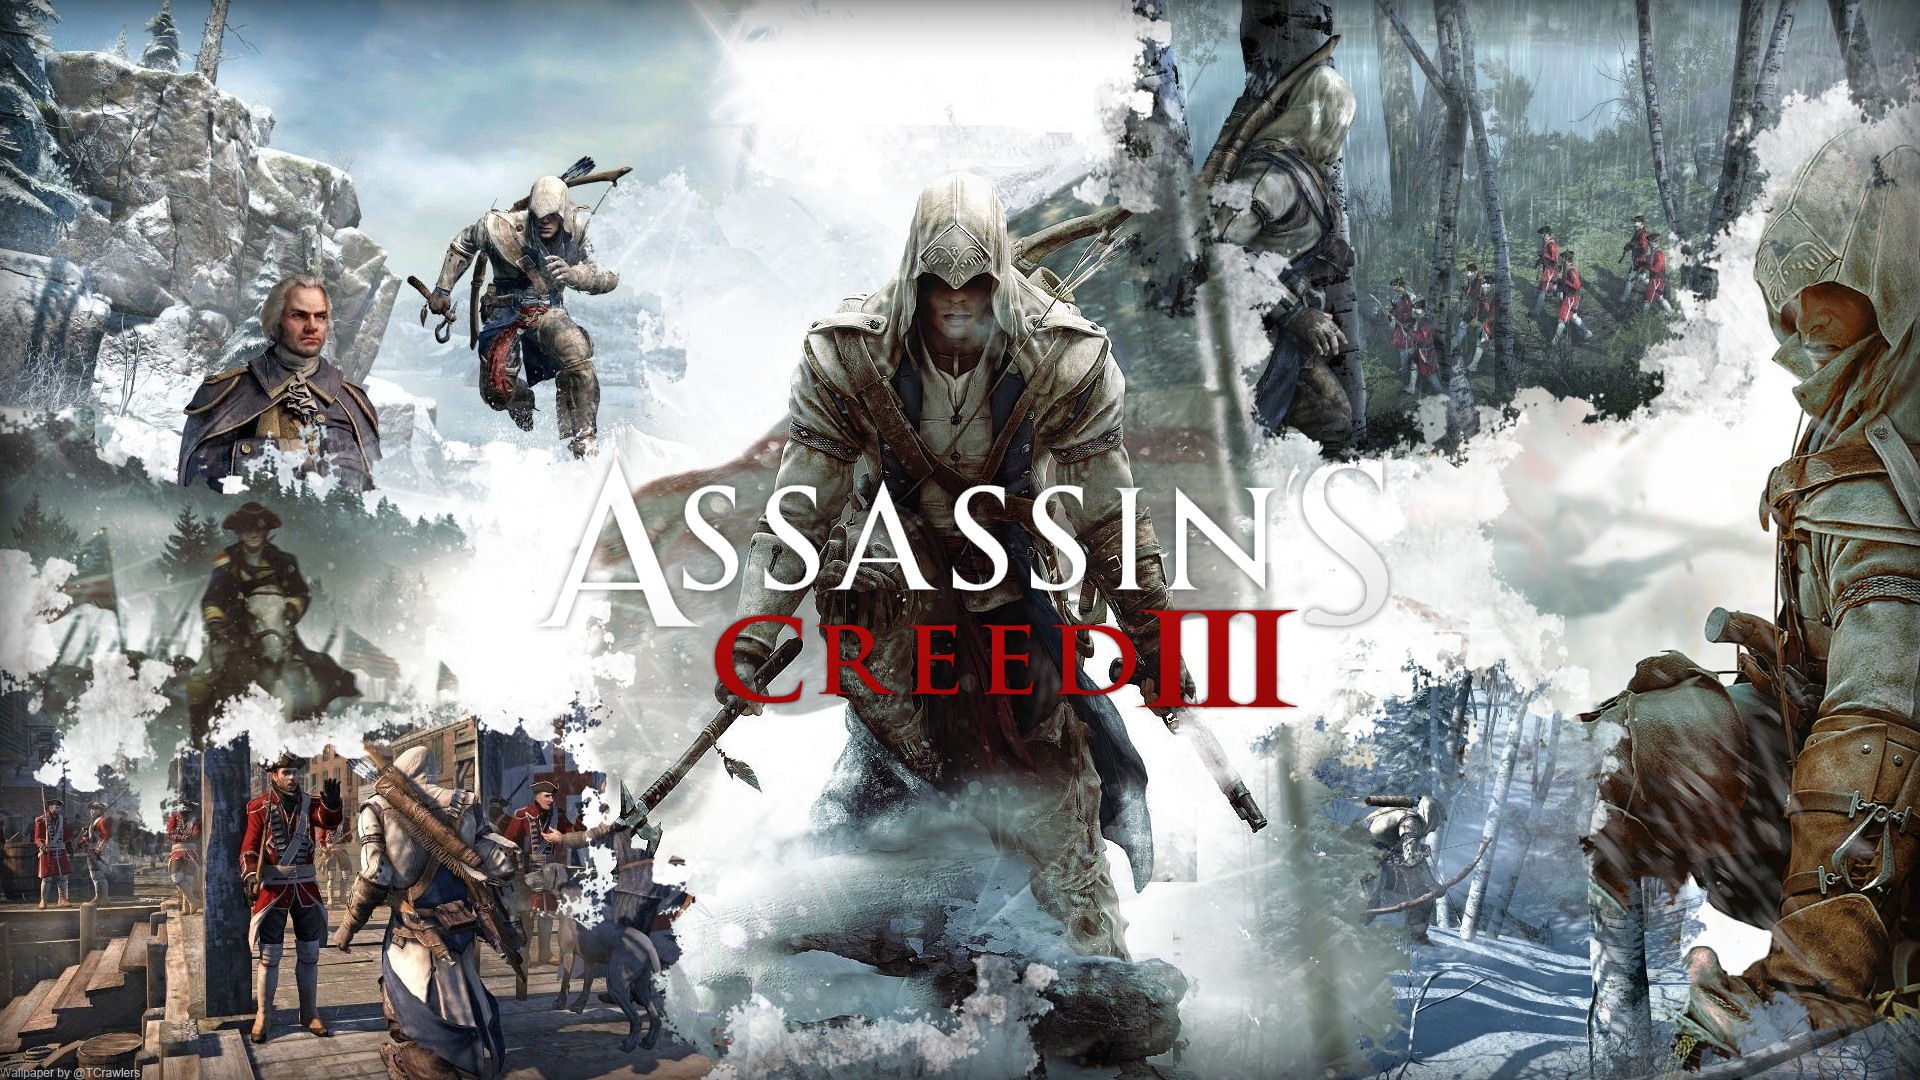 Assassin's Creed 3 HD wallpapers #14 - 1920x1080